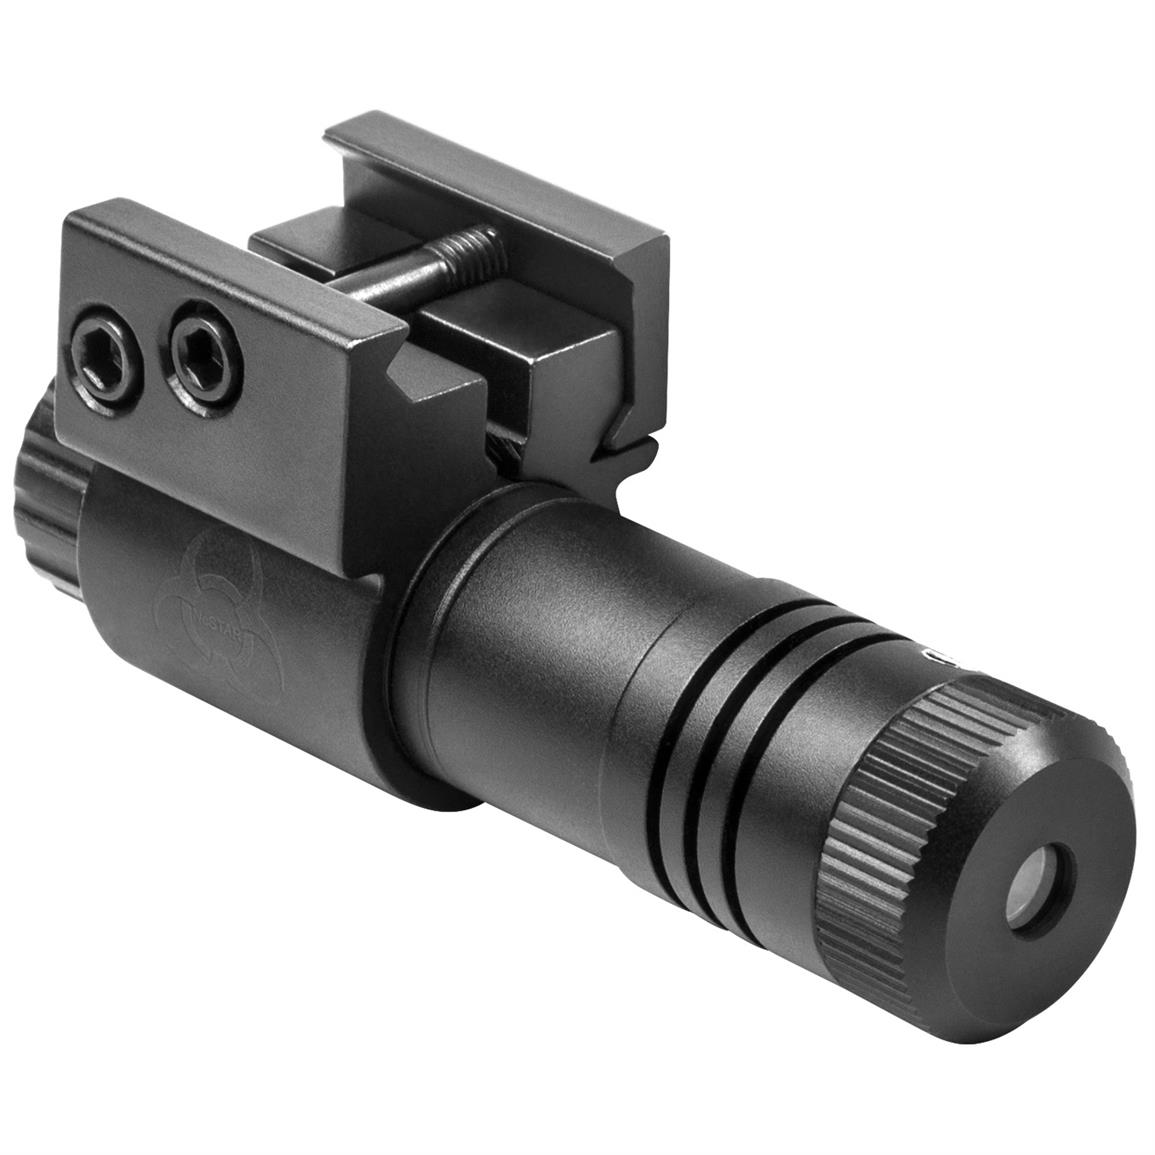 ncstar-zombie-stryke-compact-green-laser-weapon-sight-613537-laser-sights-at-sportsman-s-guide